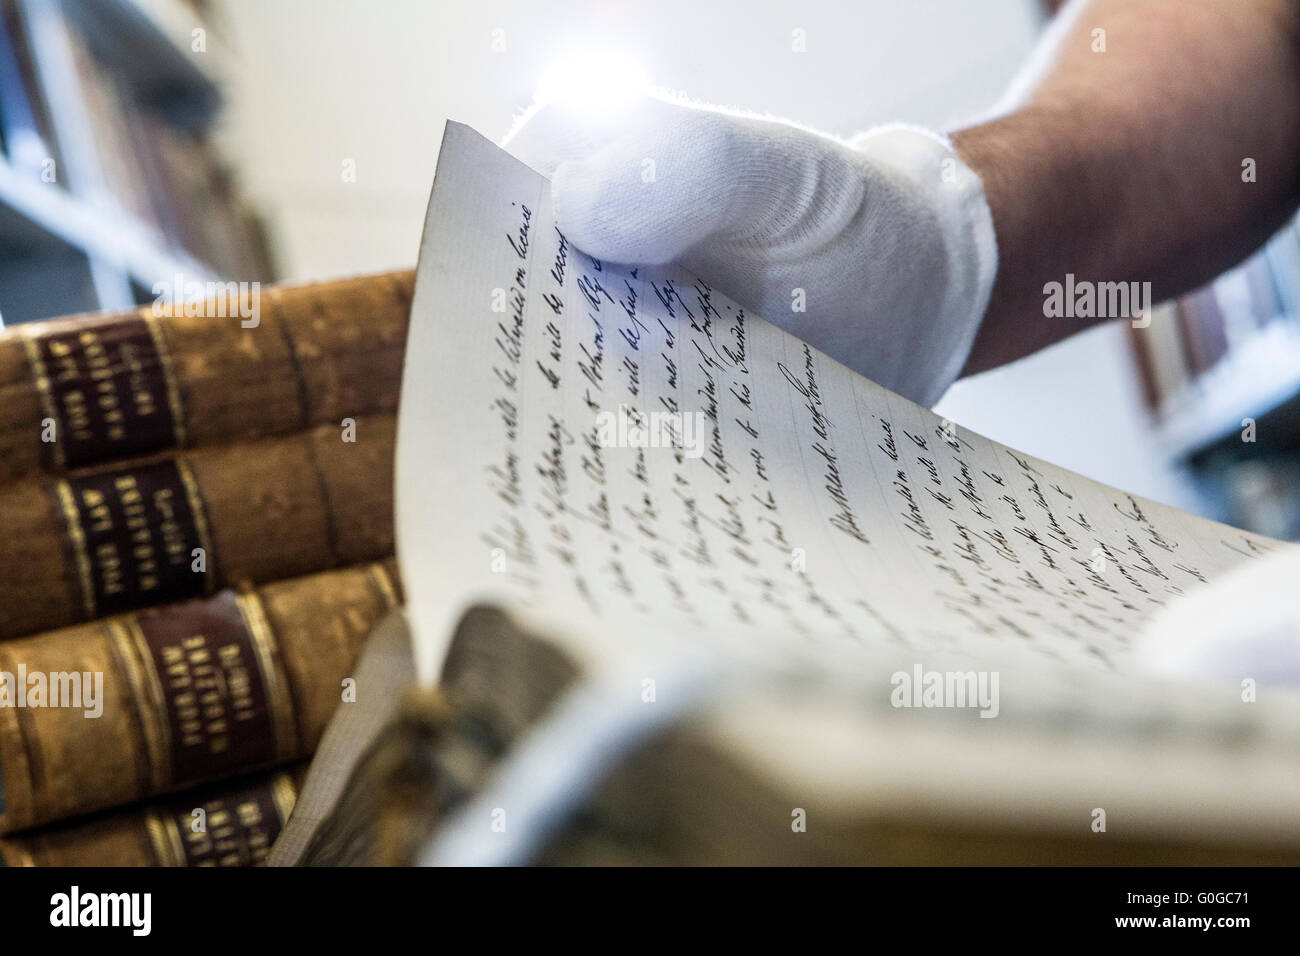 Old and Ancient manuscripts and books Stock Photo